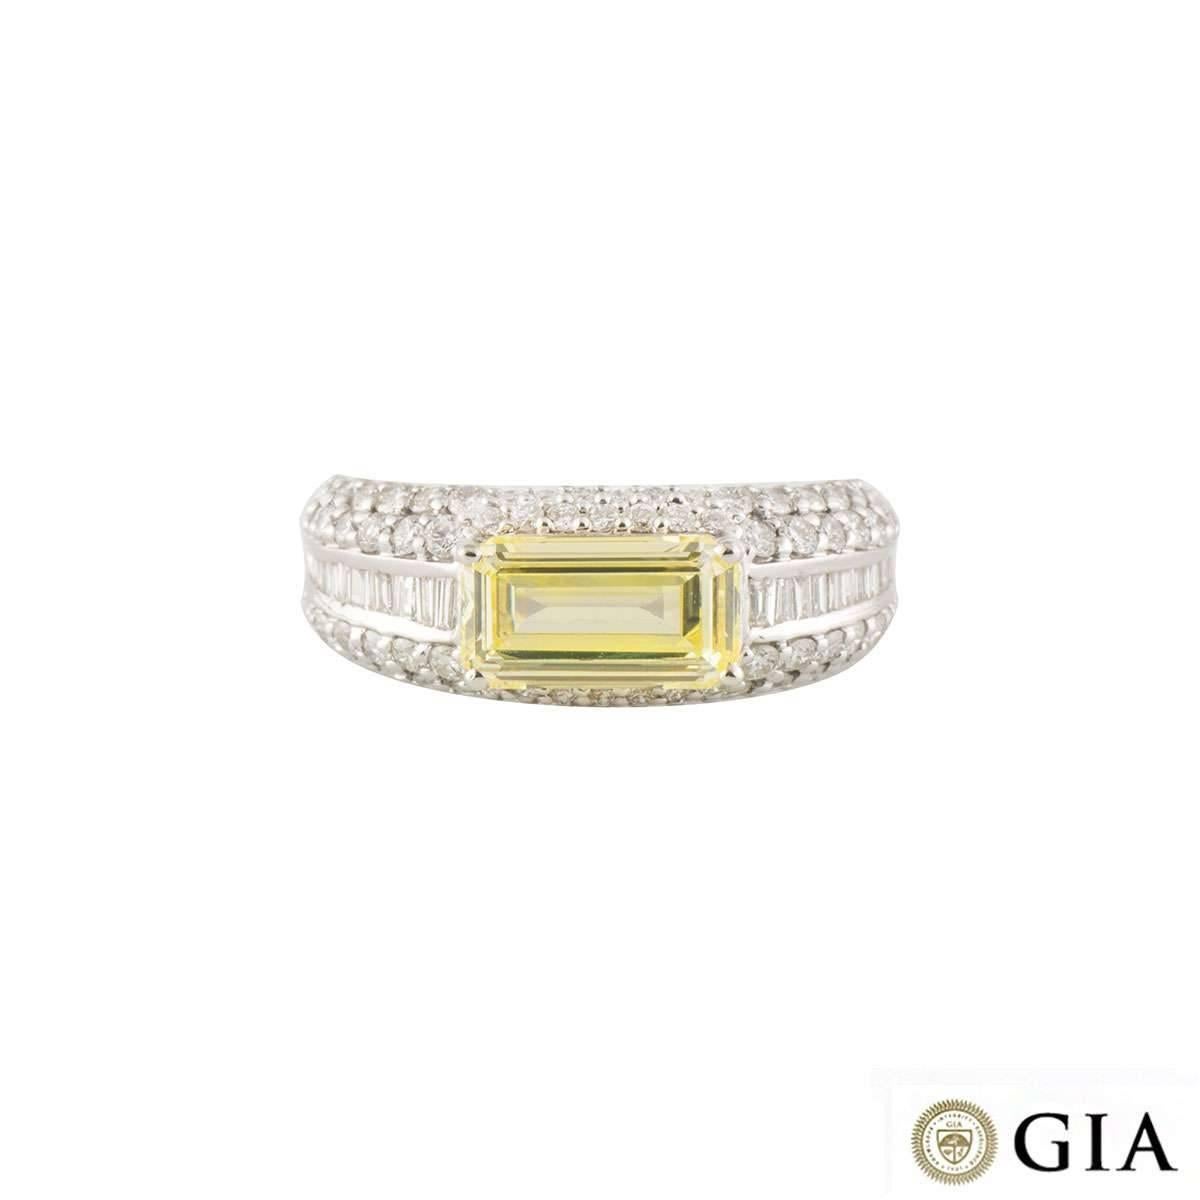 A luxurious 18k white gold diamond engagement ring. The ring comprises of a emerald cut fancy intense yellow diamond with a total weight of 2.01ct and VVS2 clarity. The diamond is complimented with 14 baguette cut diamonds in a tension setting